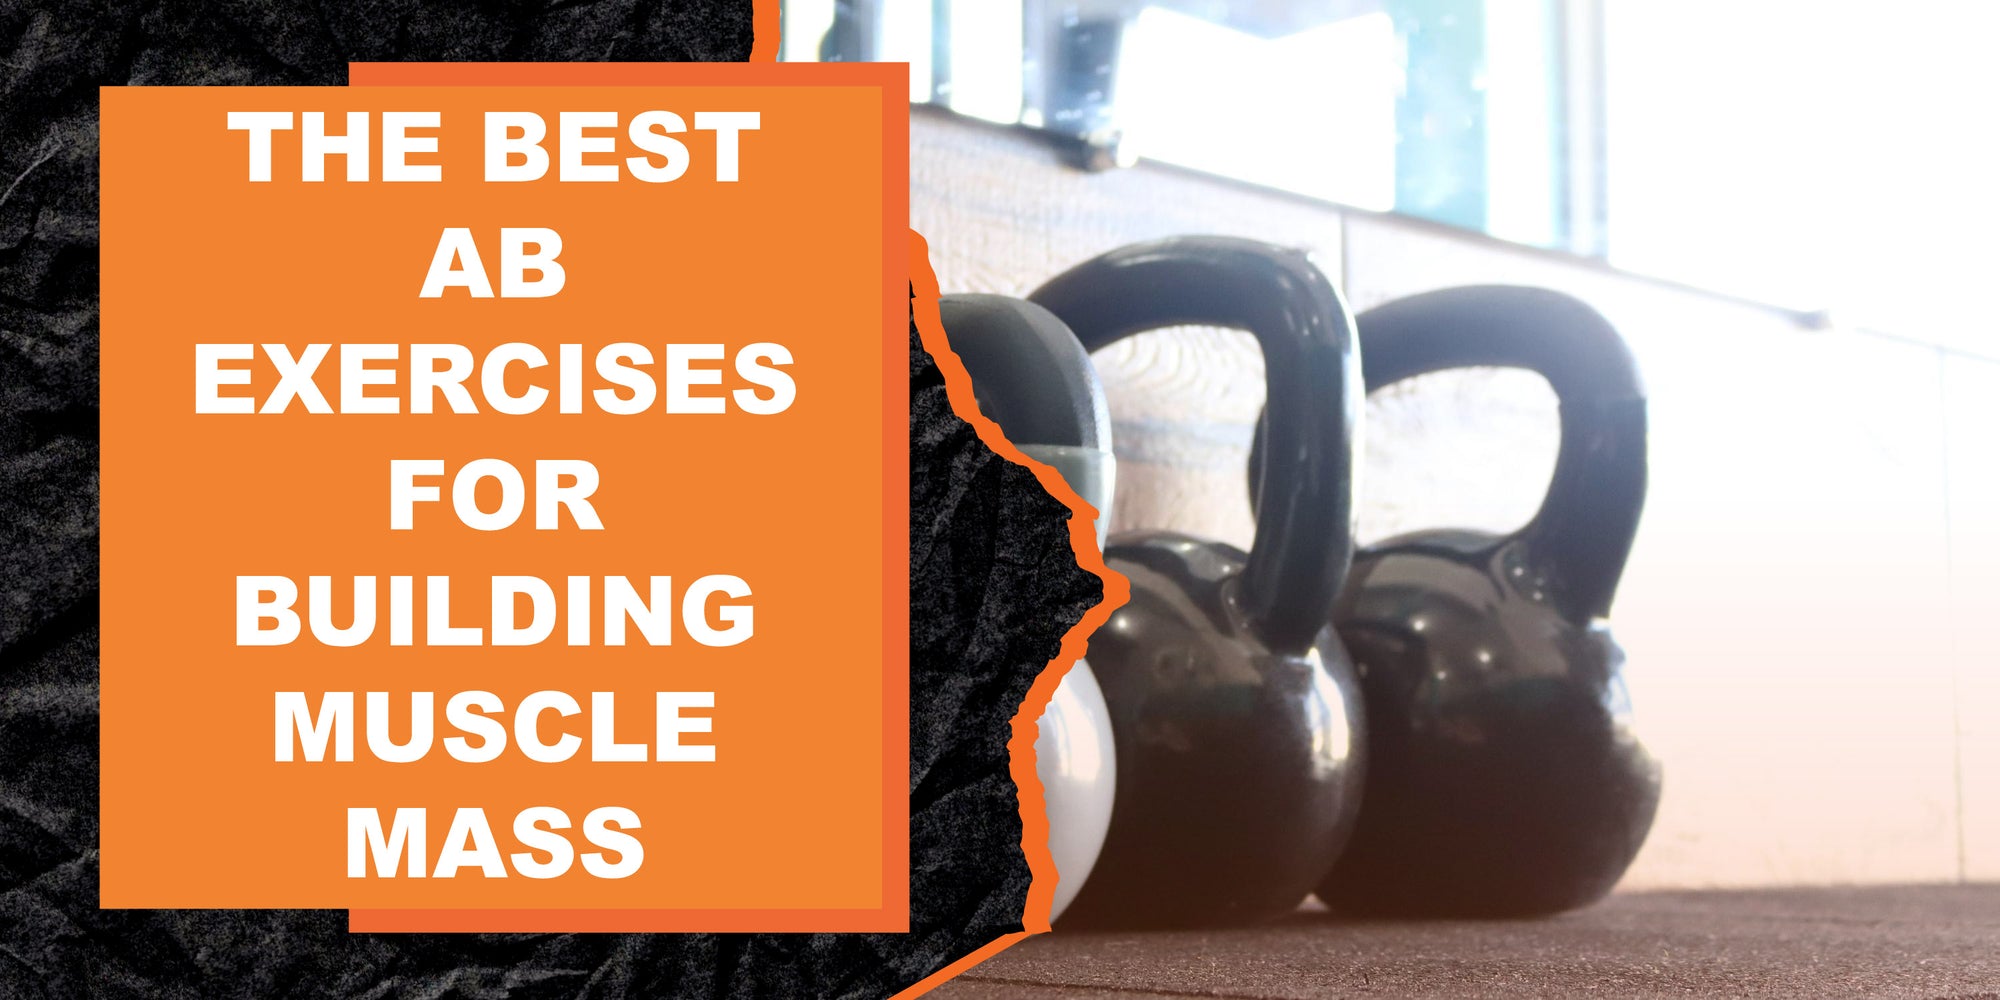 The Best Ab Exercises for Building Muscle Mass